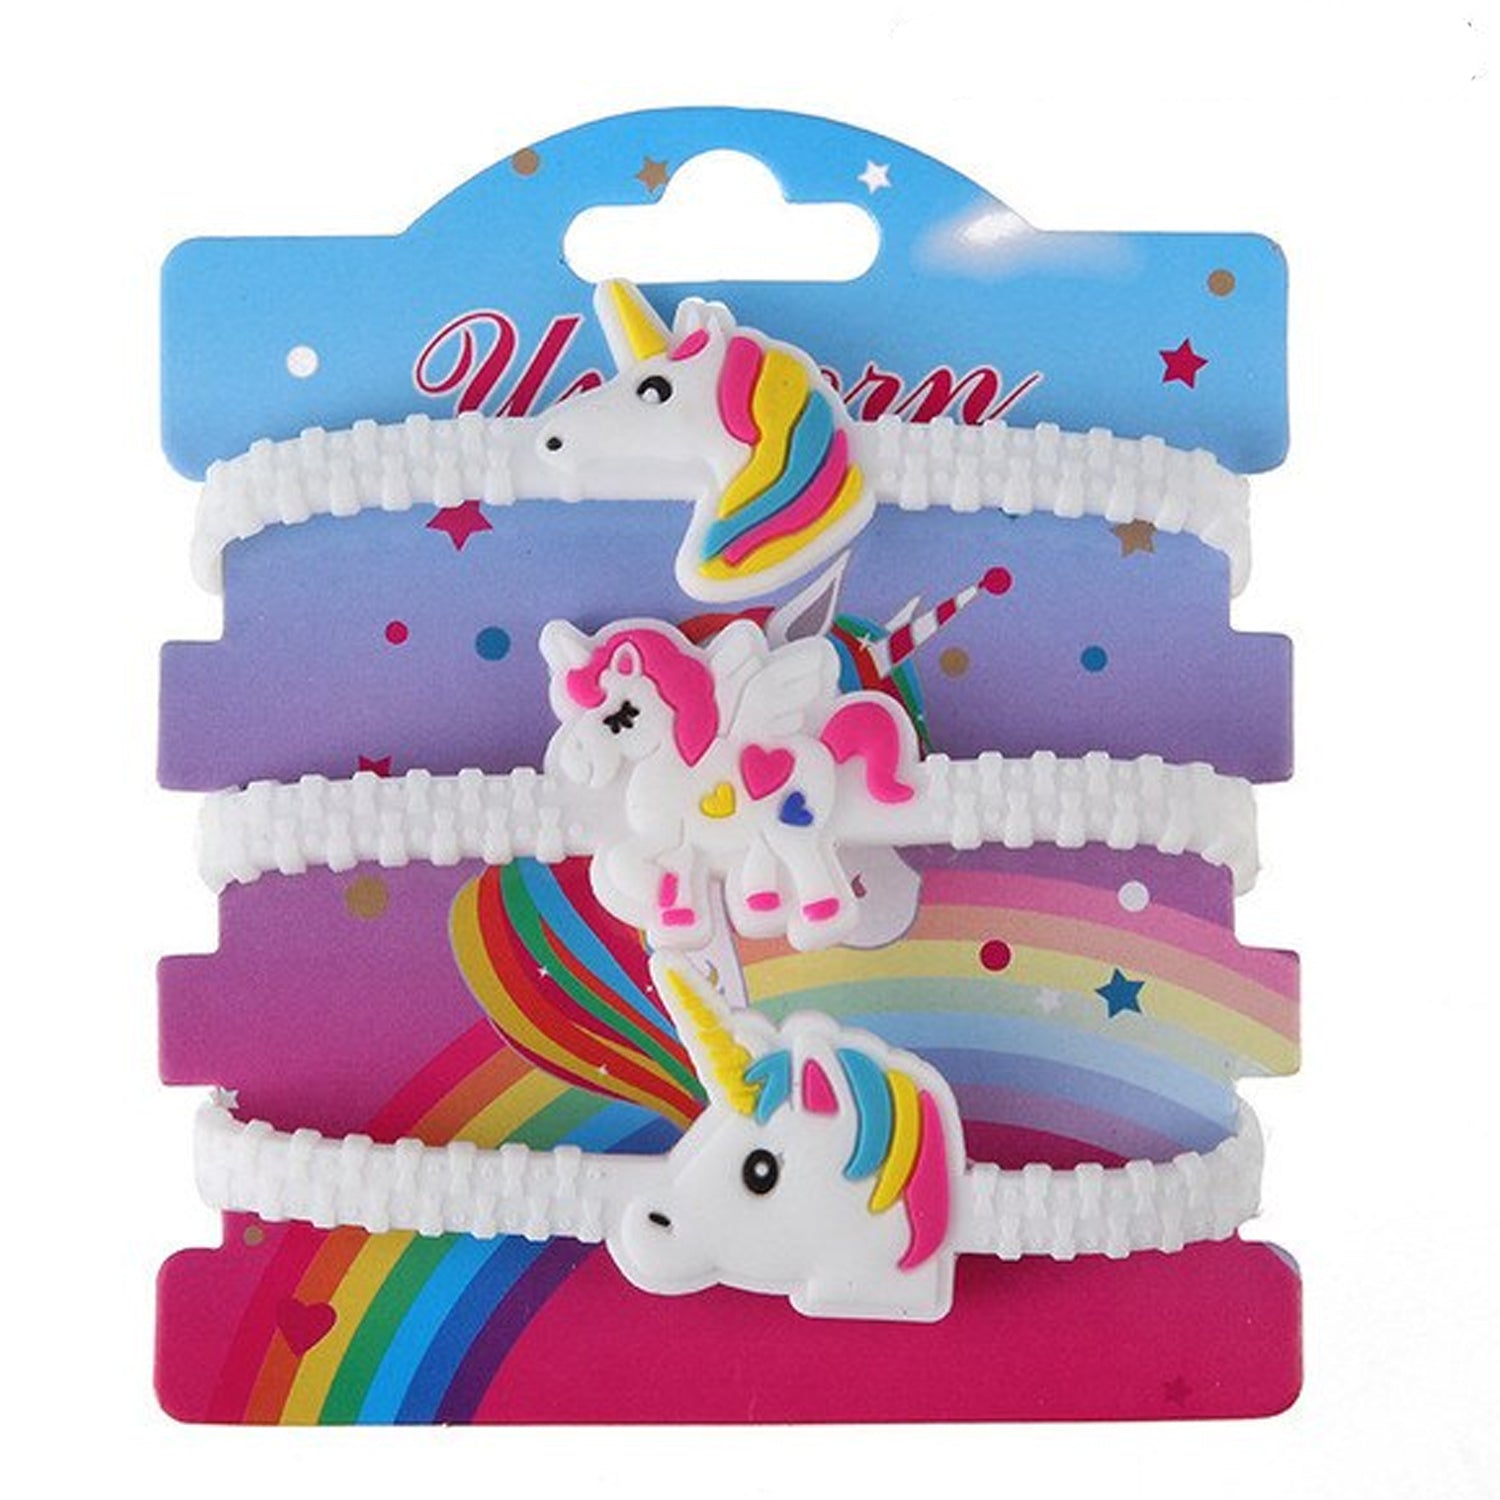 Magical Unicorn Bracelets Toy for Girls - Add Some Sparkle to Playtime!